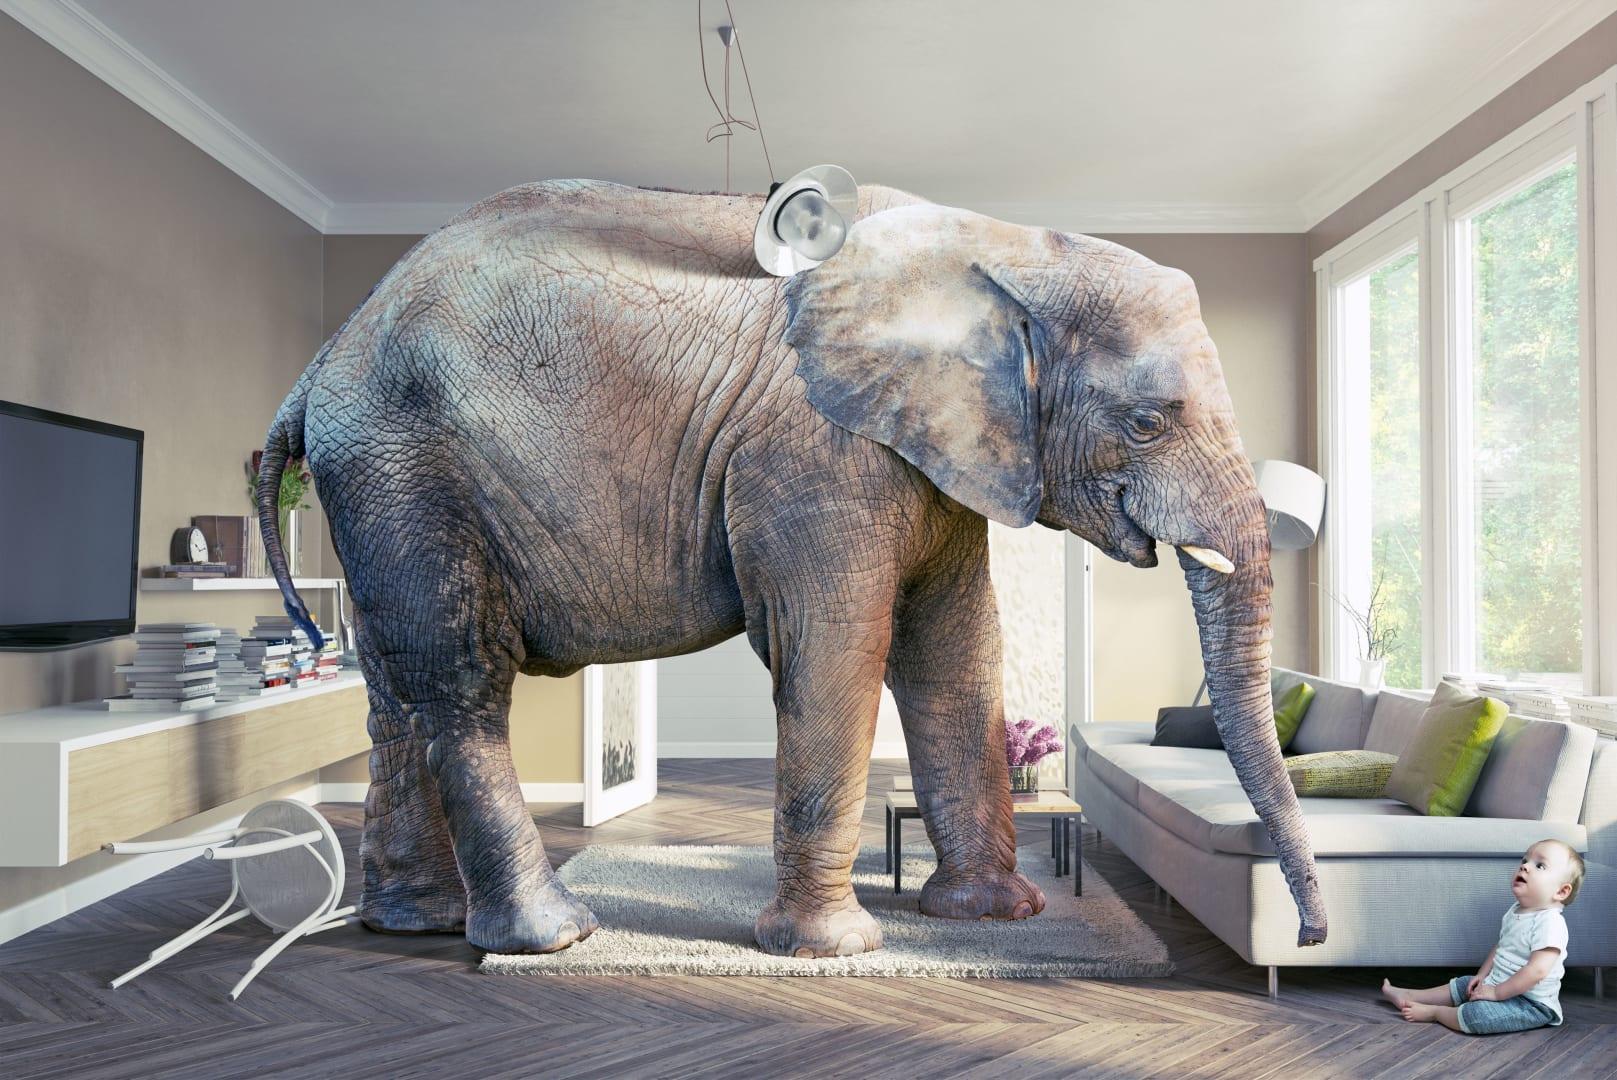 Ponesse: The elephant in the room: Regulatory capture?